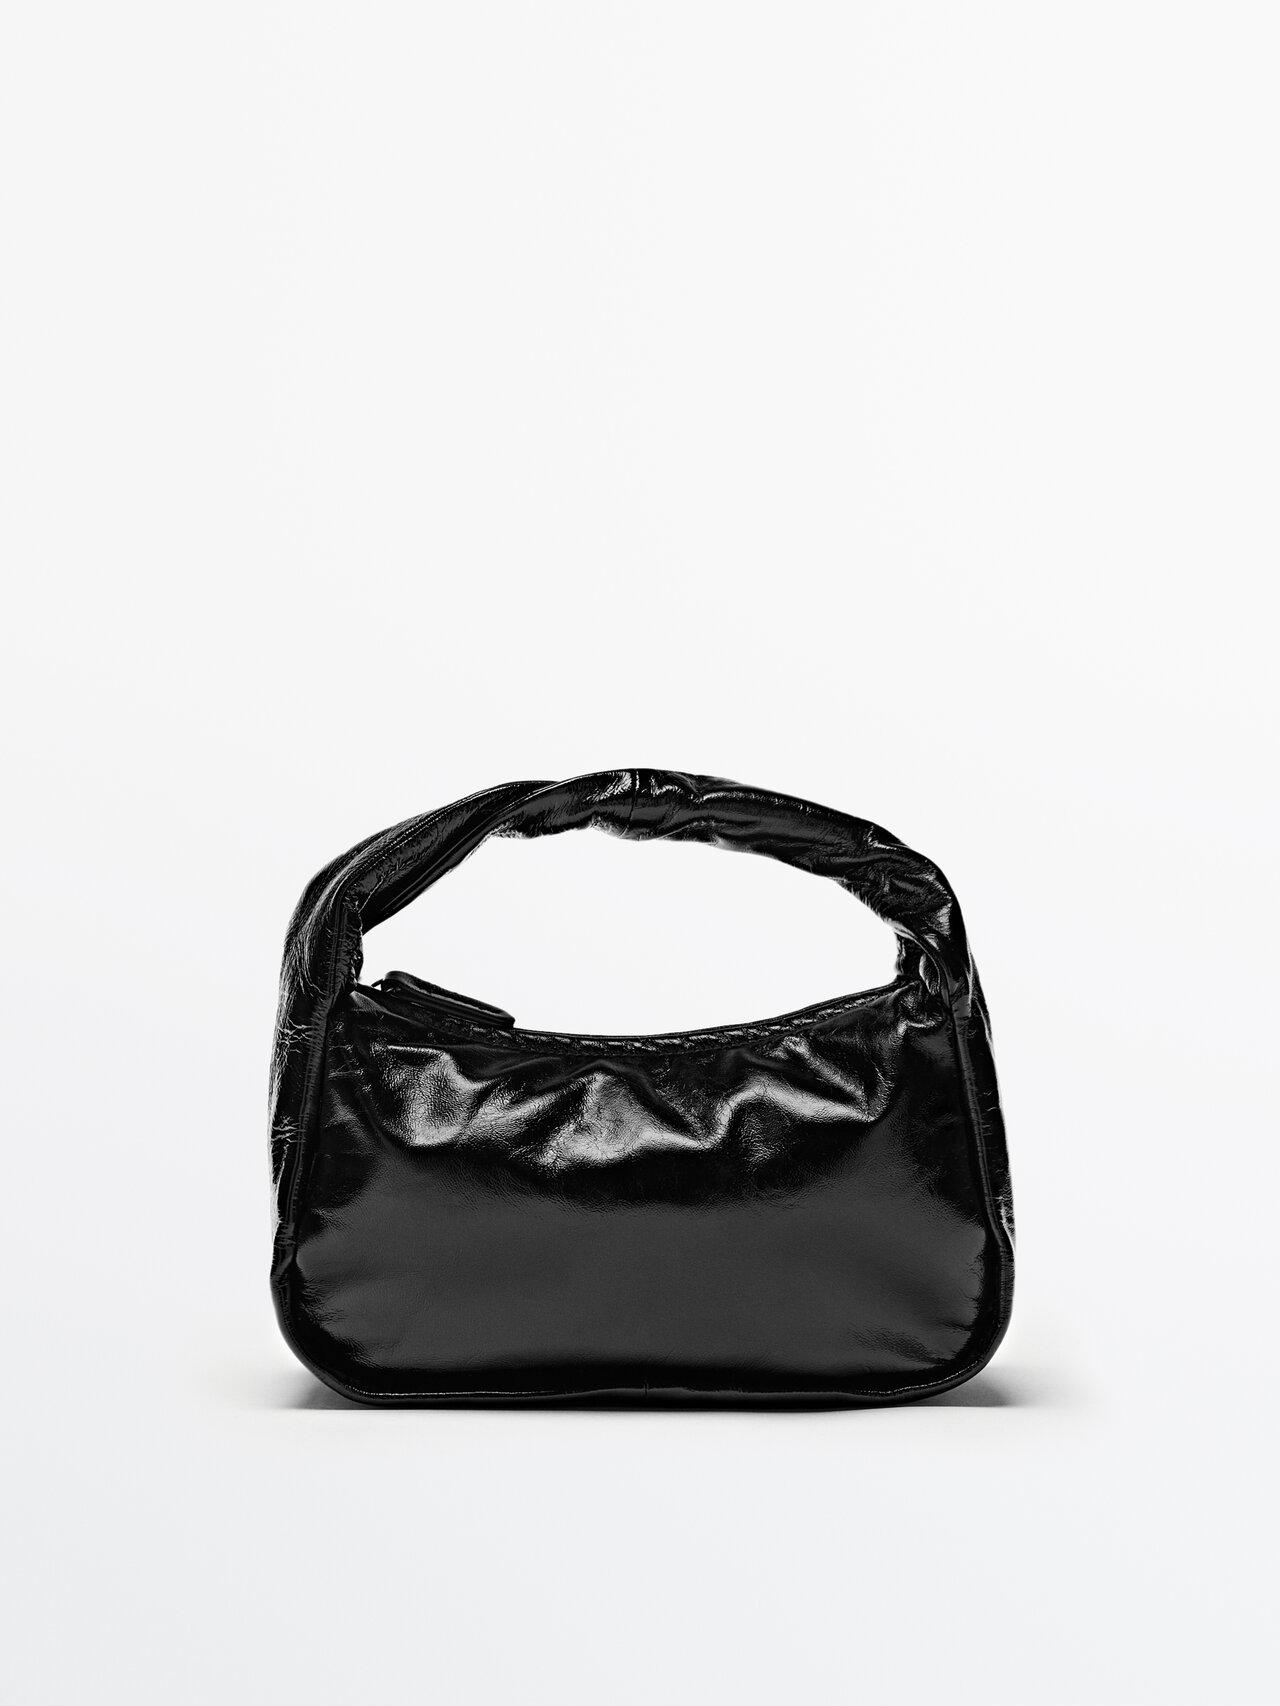 MASSIMO DUTTI Leather Bucket Bag With A Crackled Finish in Black | Lyst